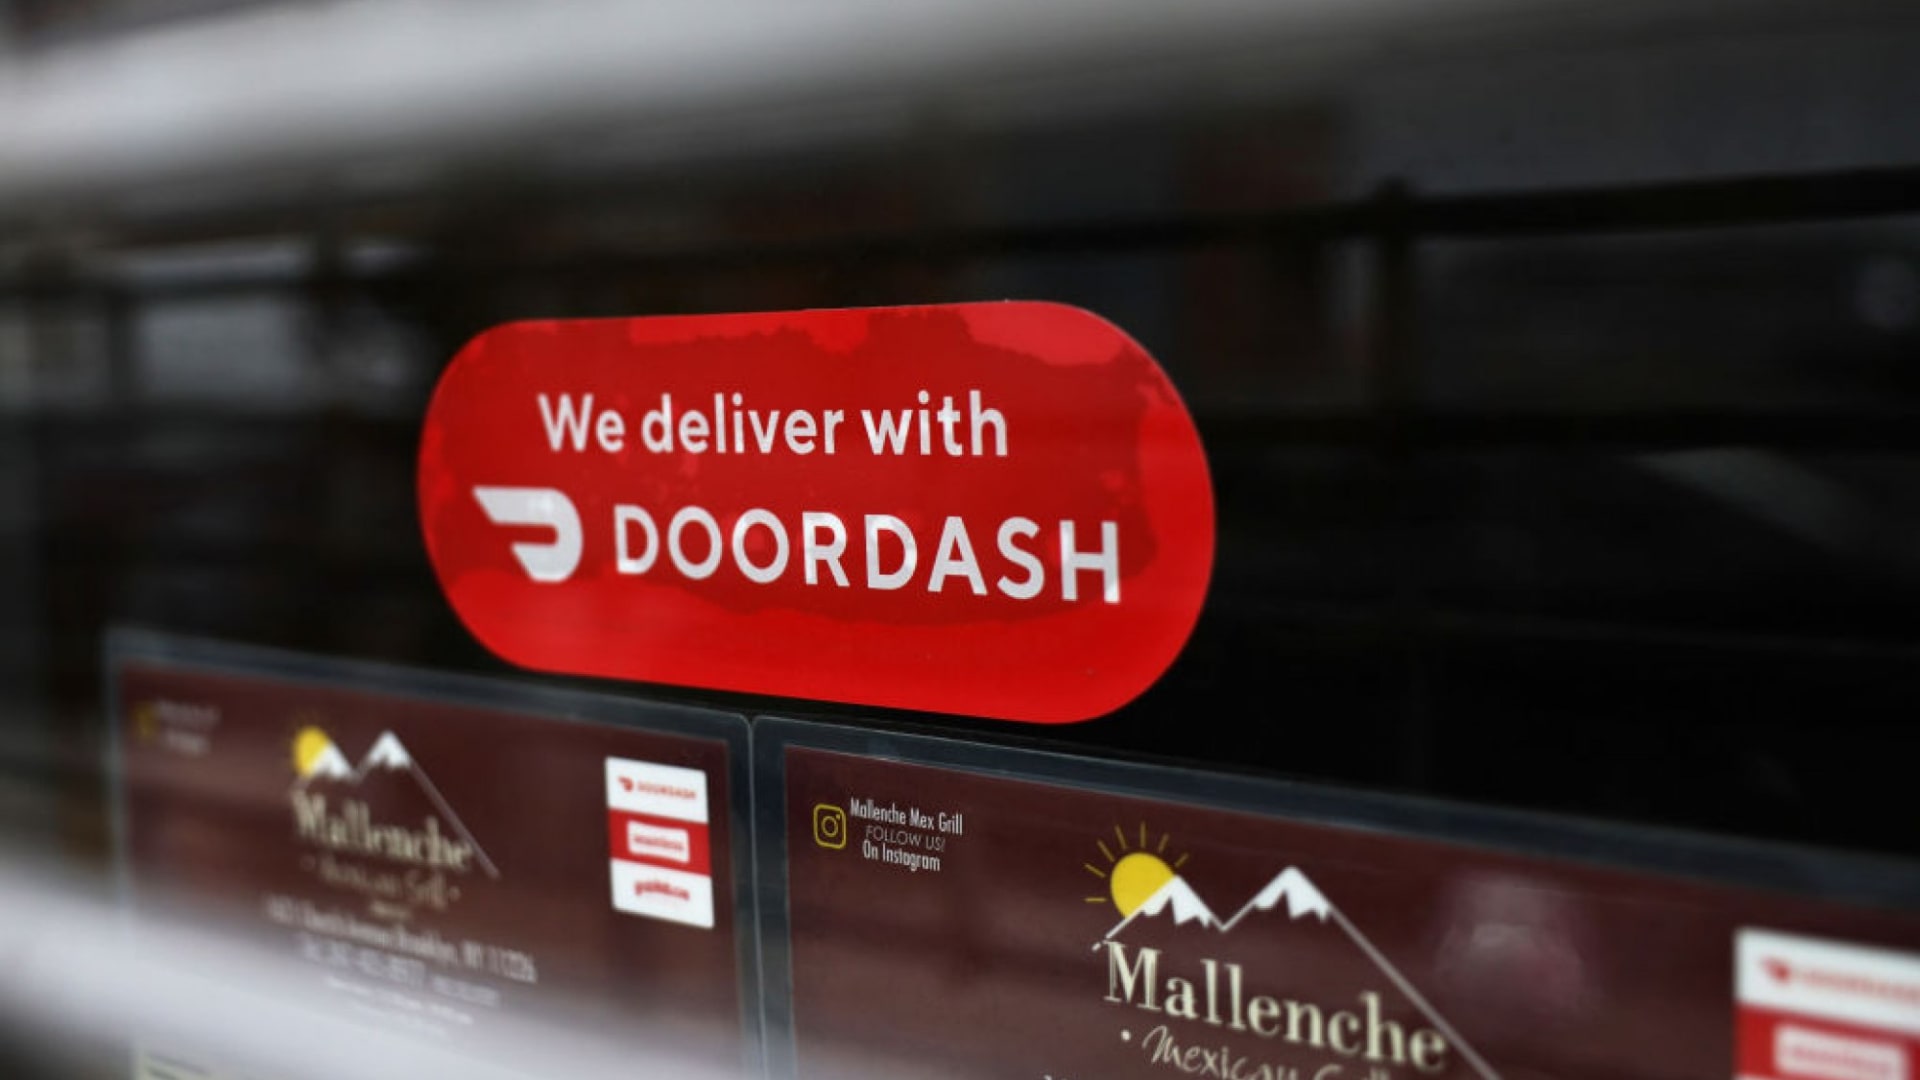 DoorDash Just Announced a New Company Policy, and Yes, You Should Definitely Copy It